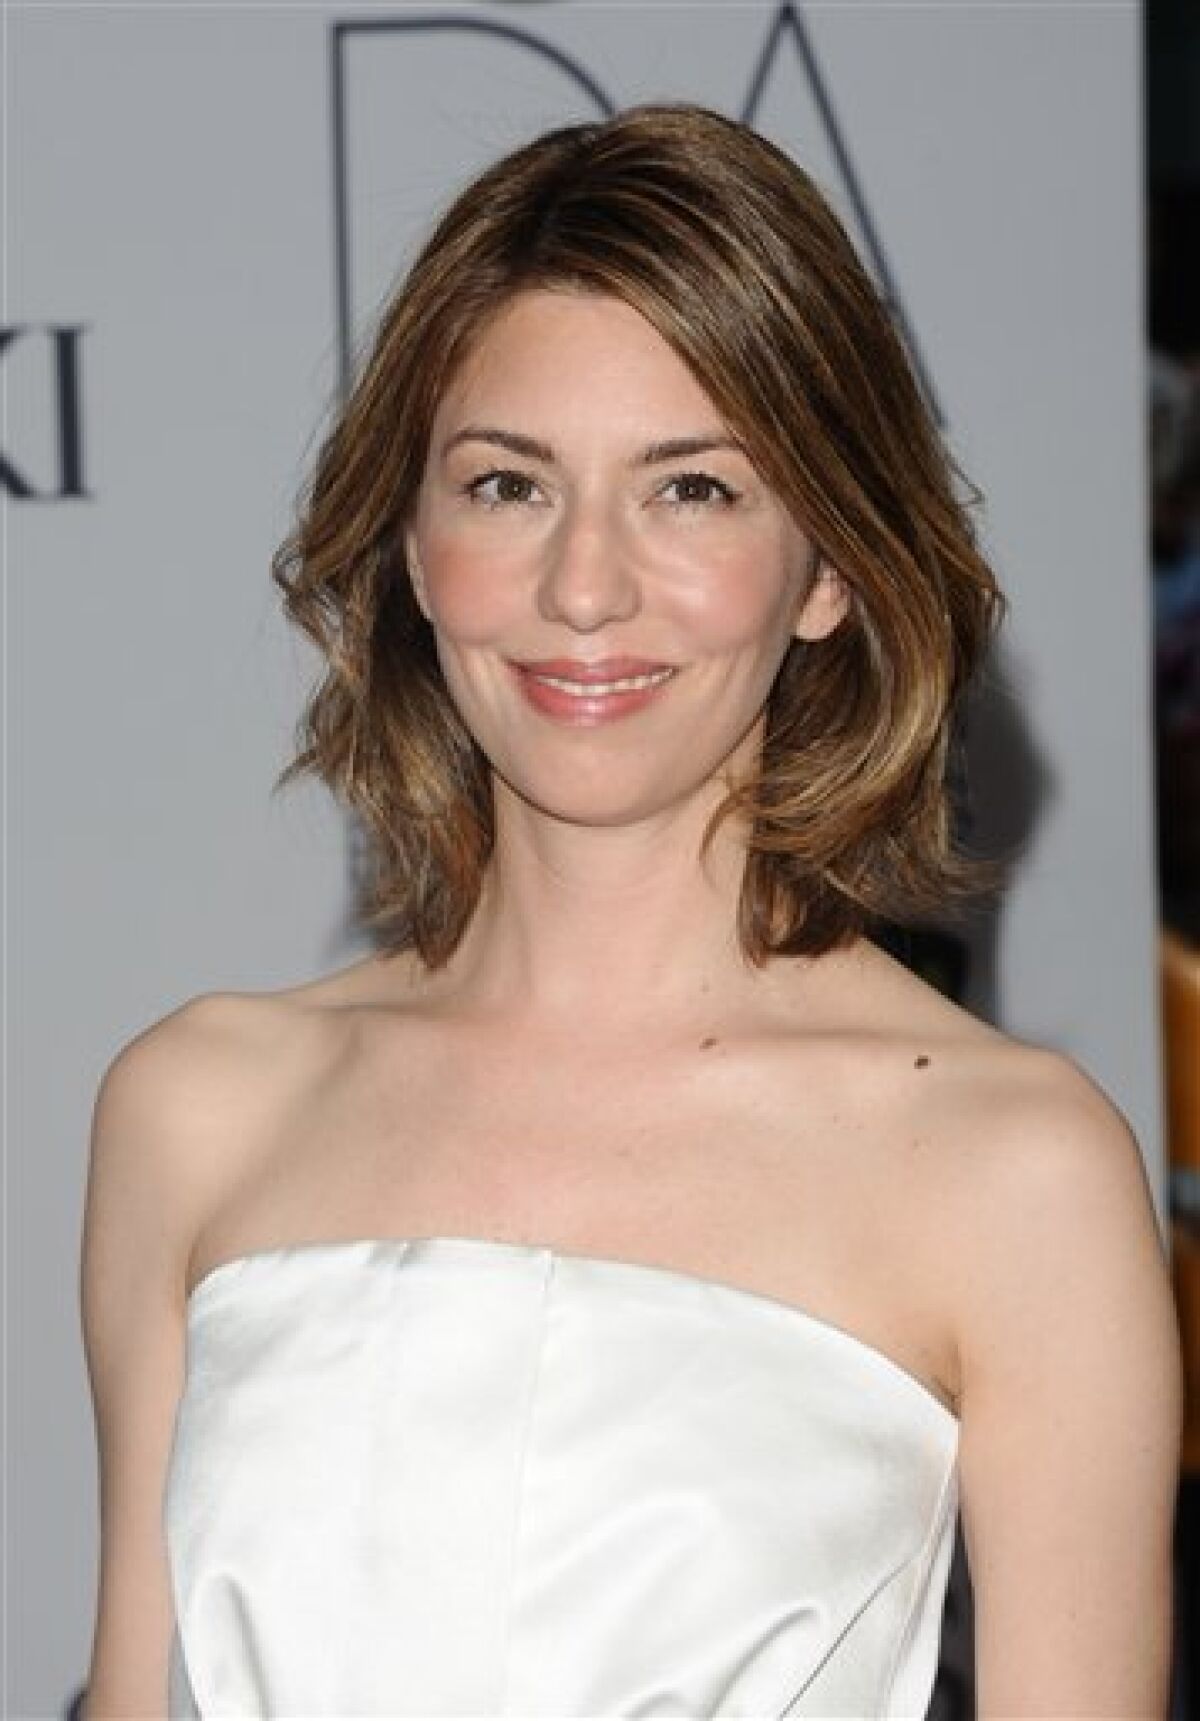 In this June 6, 2011 photo, Sofia Coppola attends the 2011 CFDA Fashion Awards at Alice Tully Hall in New York. Coppola is going back to her roots, getting married Saturday, Aug. 27, 2011, in the southern Italian town where her great-grandfather was born. Coppola is marrying Thomas Mars, lead singer of the French rock band Phoenix and the father of their two young daughters. (AP Photo/Peter Kramer)